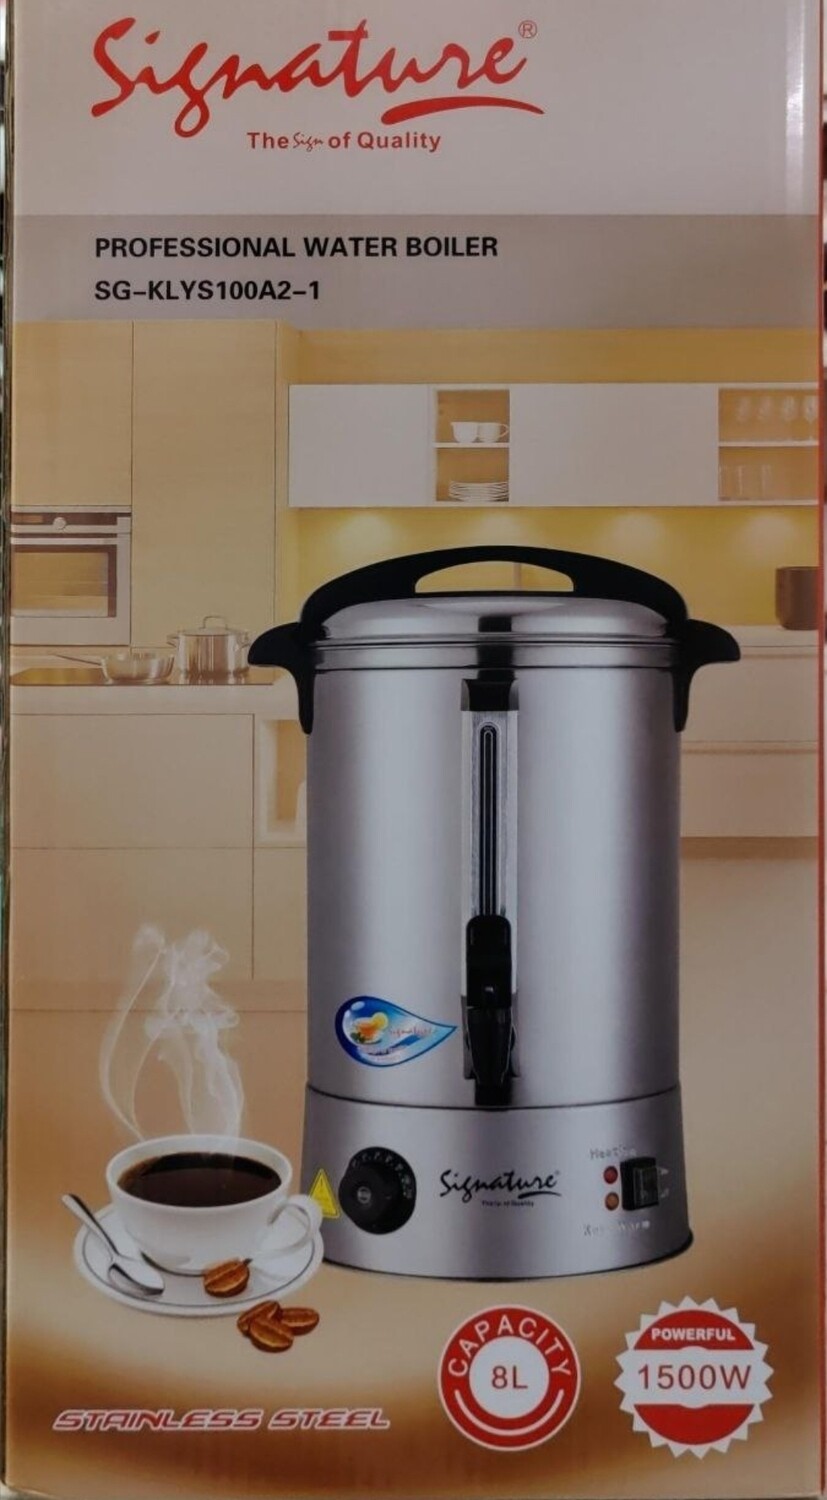 Signature 8.0 Ltr Electric Water/Tea Boiler Heavy duty, Stainless Steel, Professional uses SG-KLYS100A2-1 (1500W)